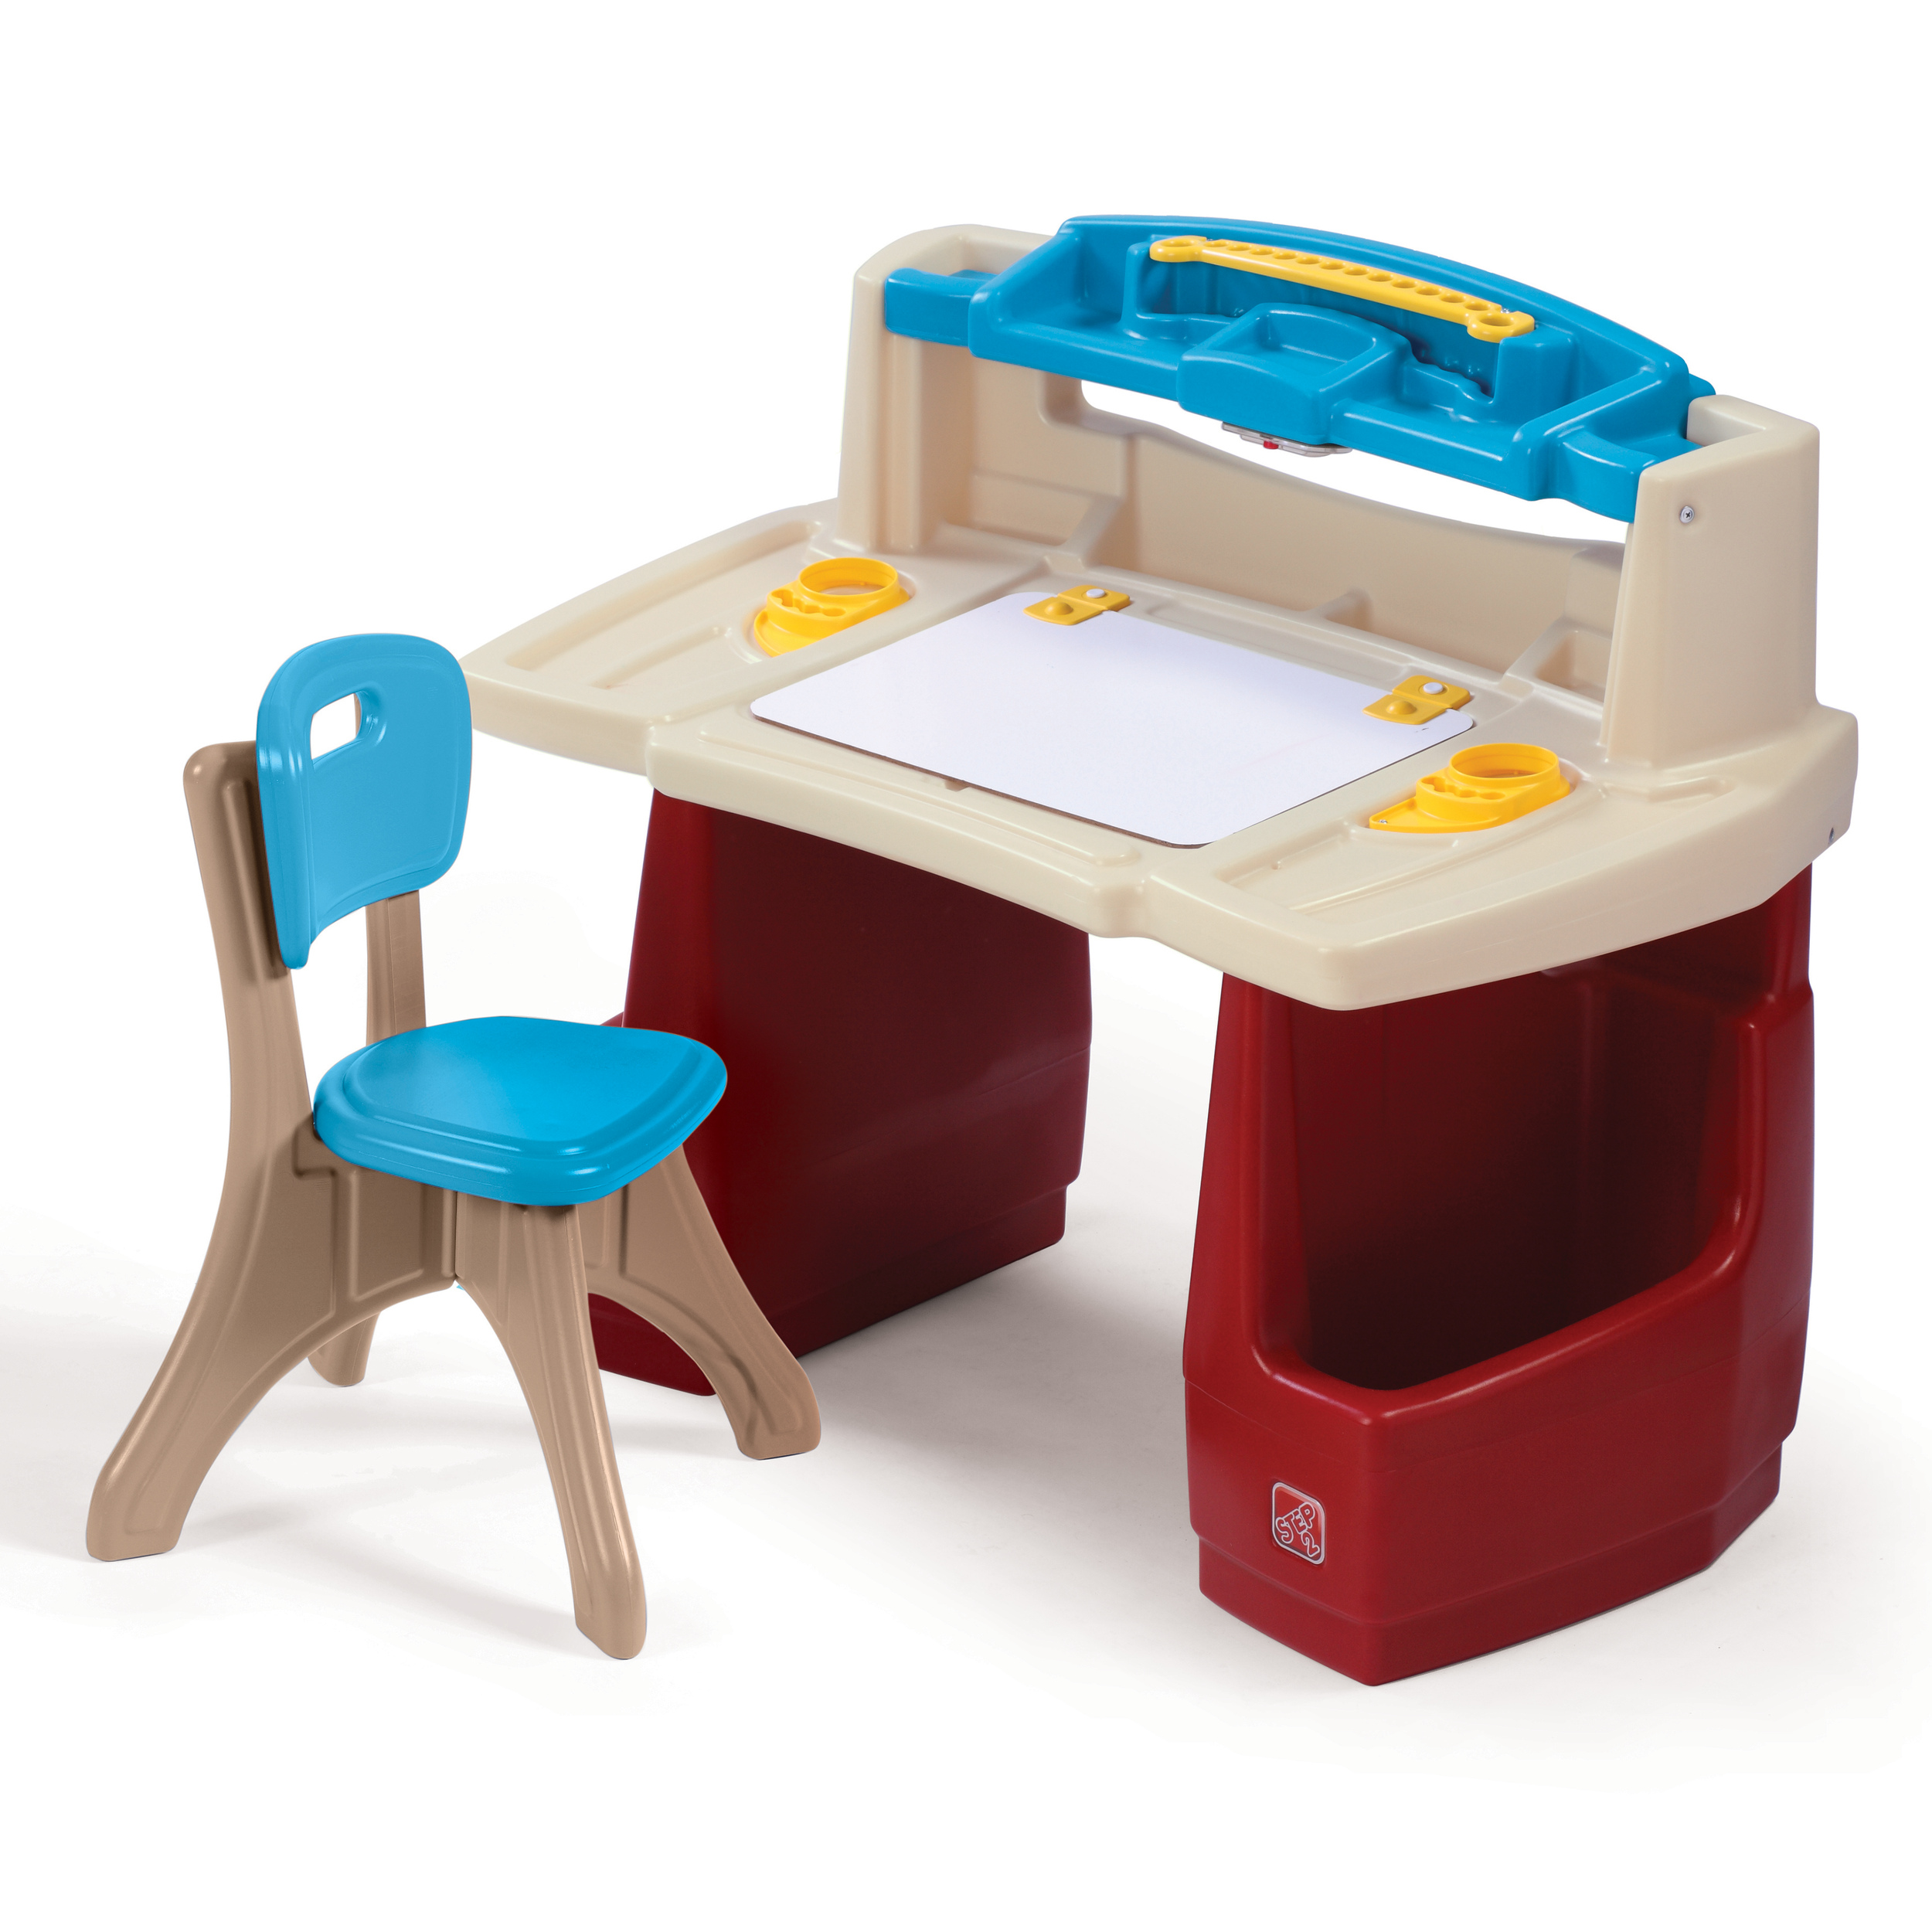 Step2 Deluxe Art Master Desk Plastic Kids Activity Center and Table - image 1 of 26